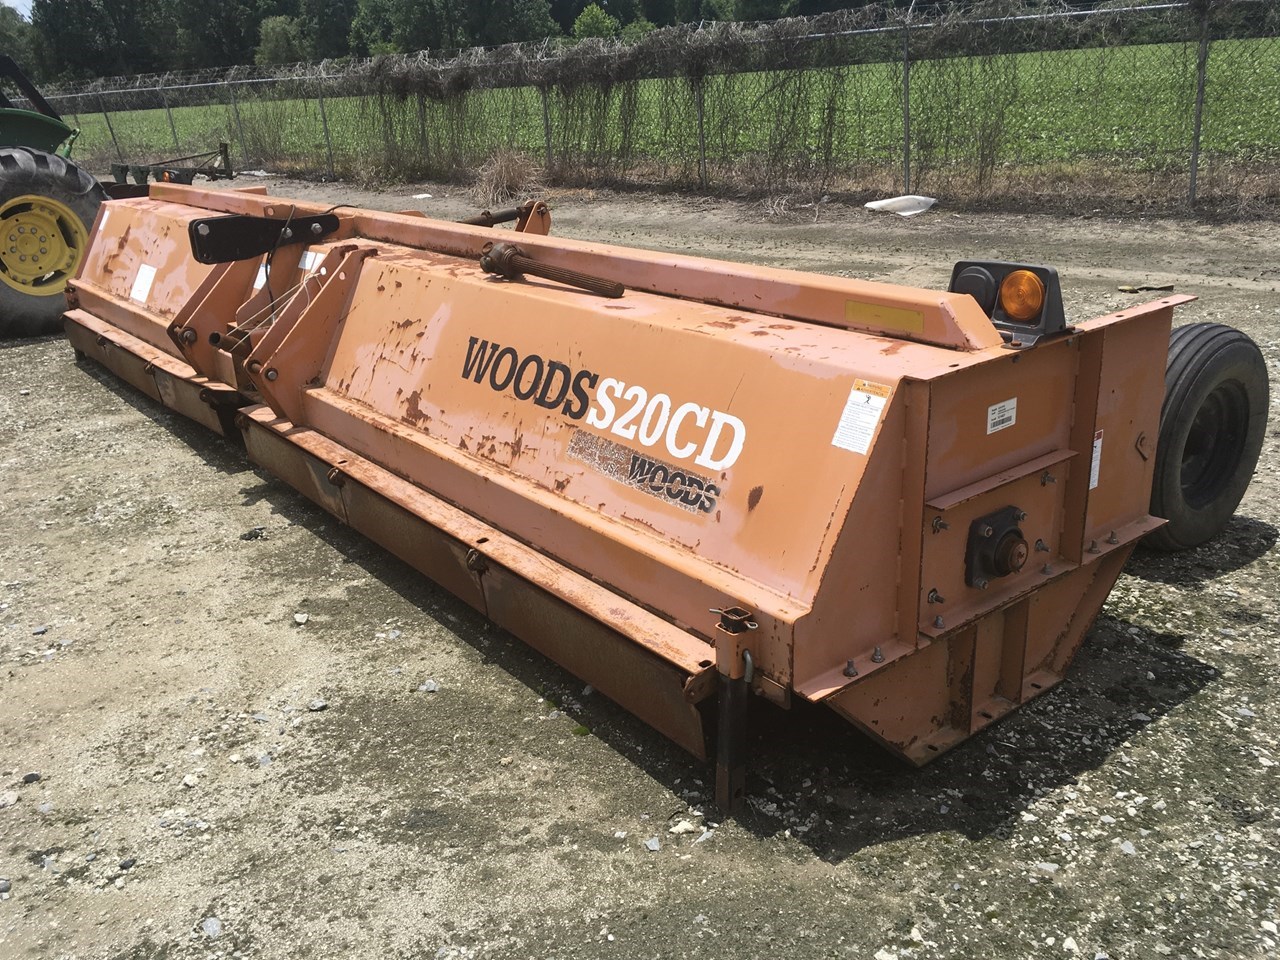  Woods S20CDHD Cutter For Sale